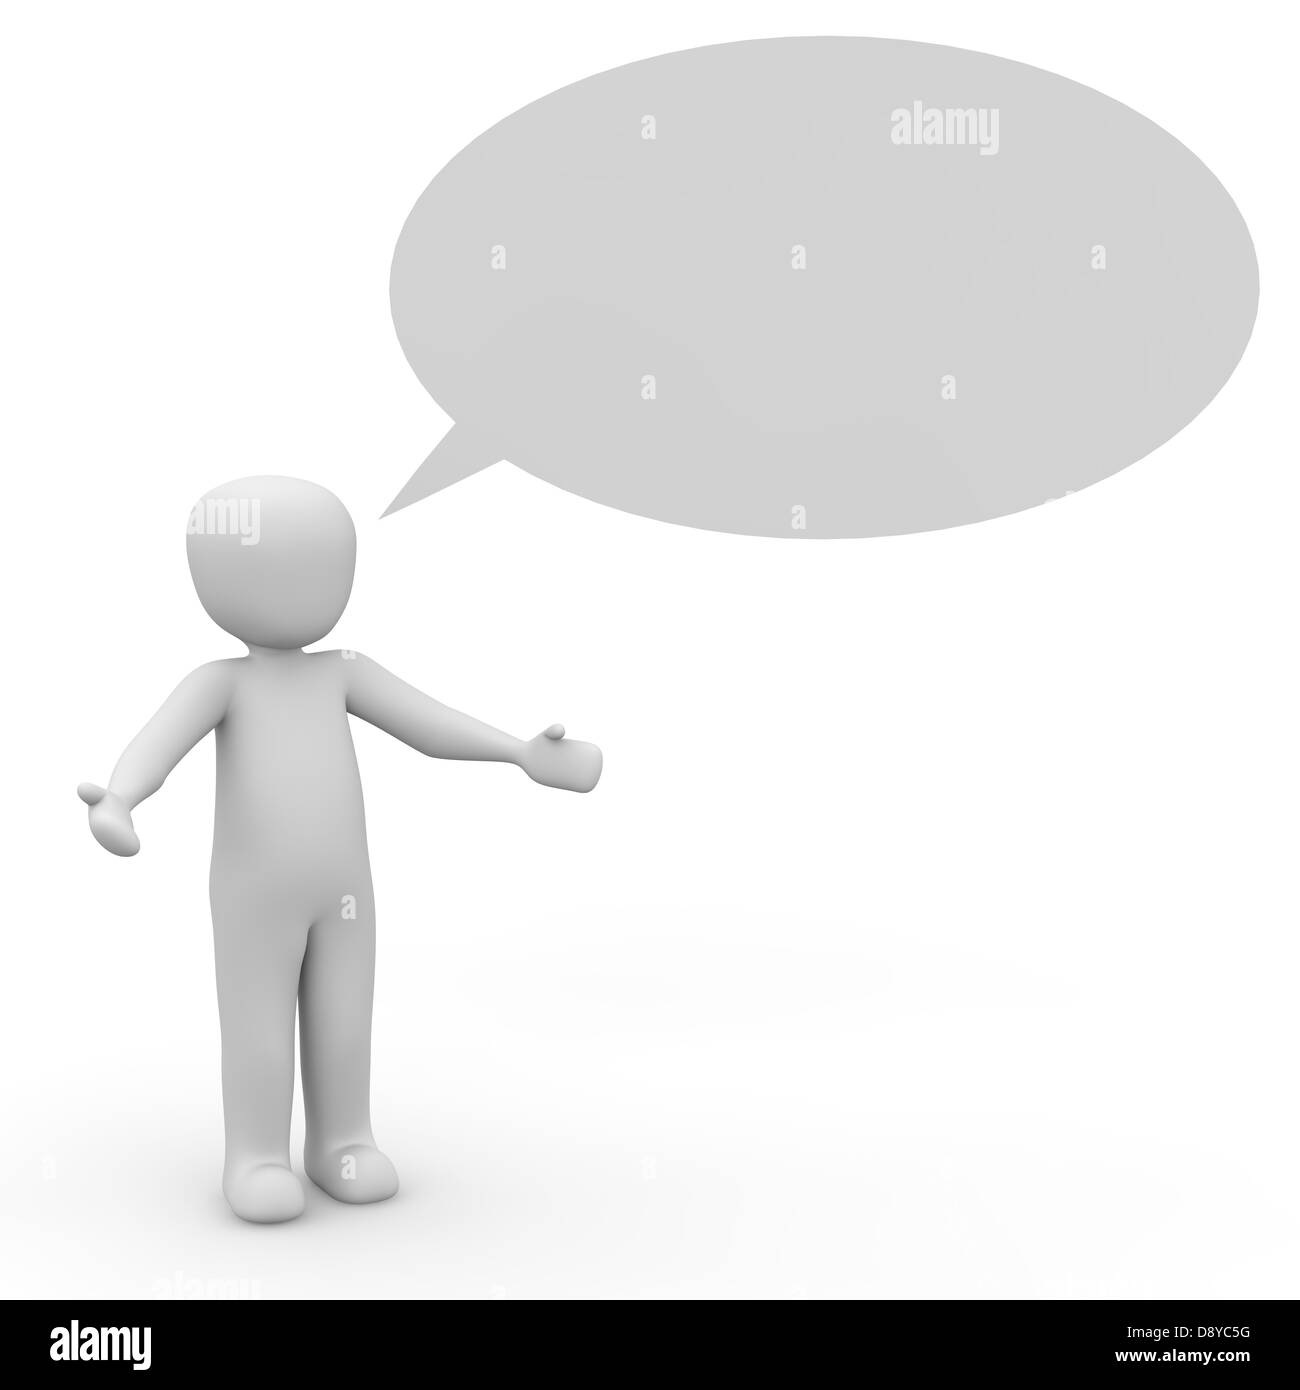 A comic character speaks with the help of a speech bubble. Stock Photo